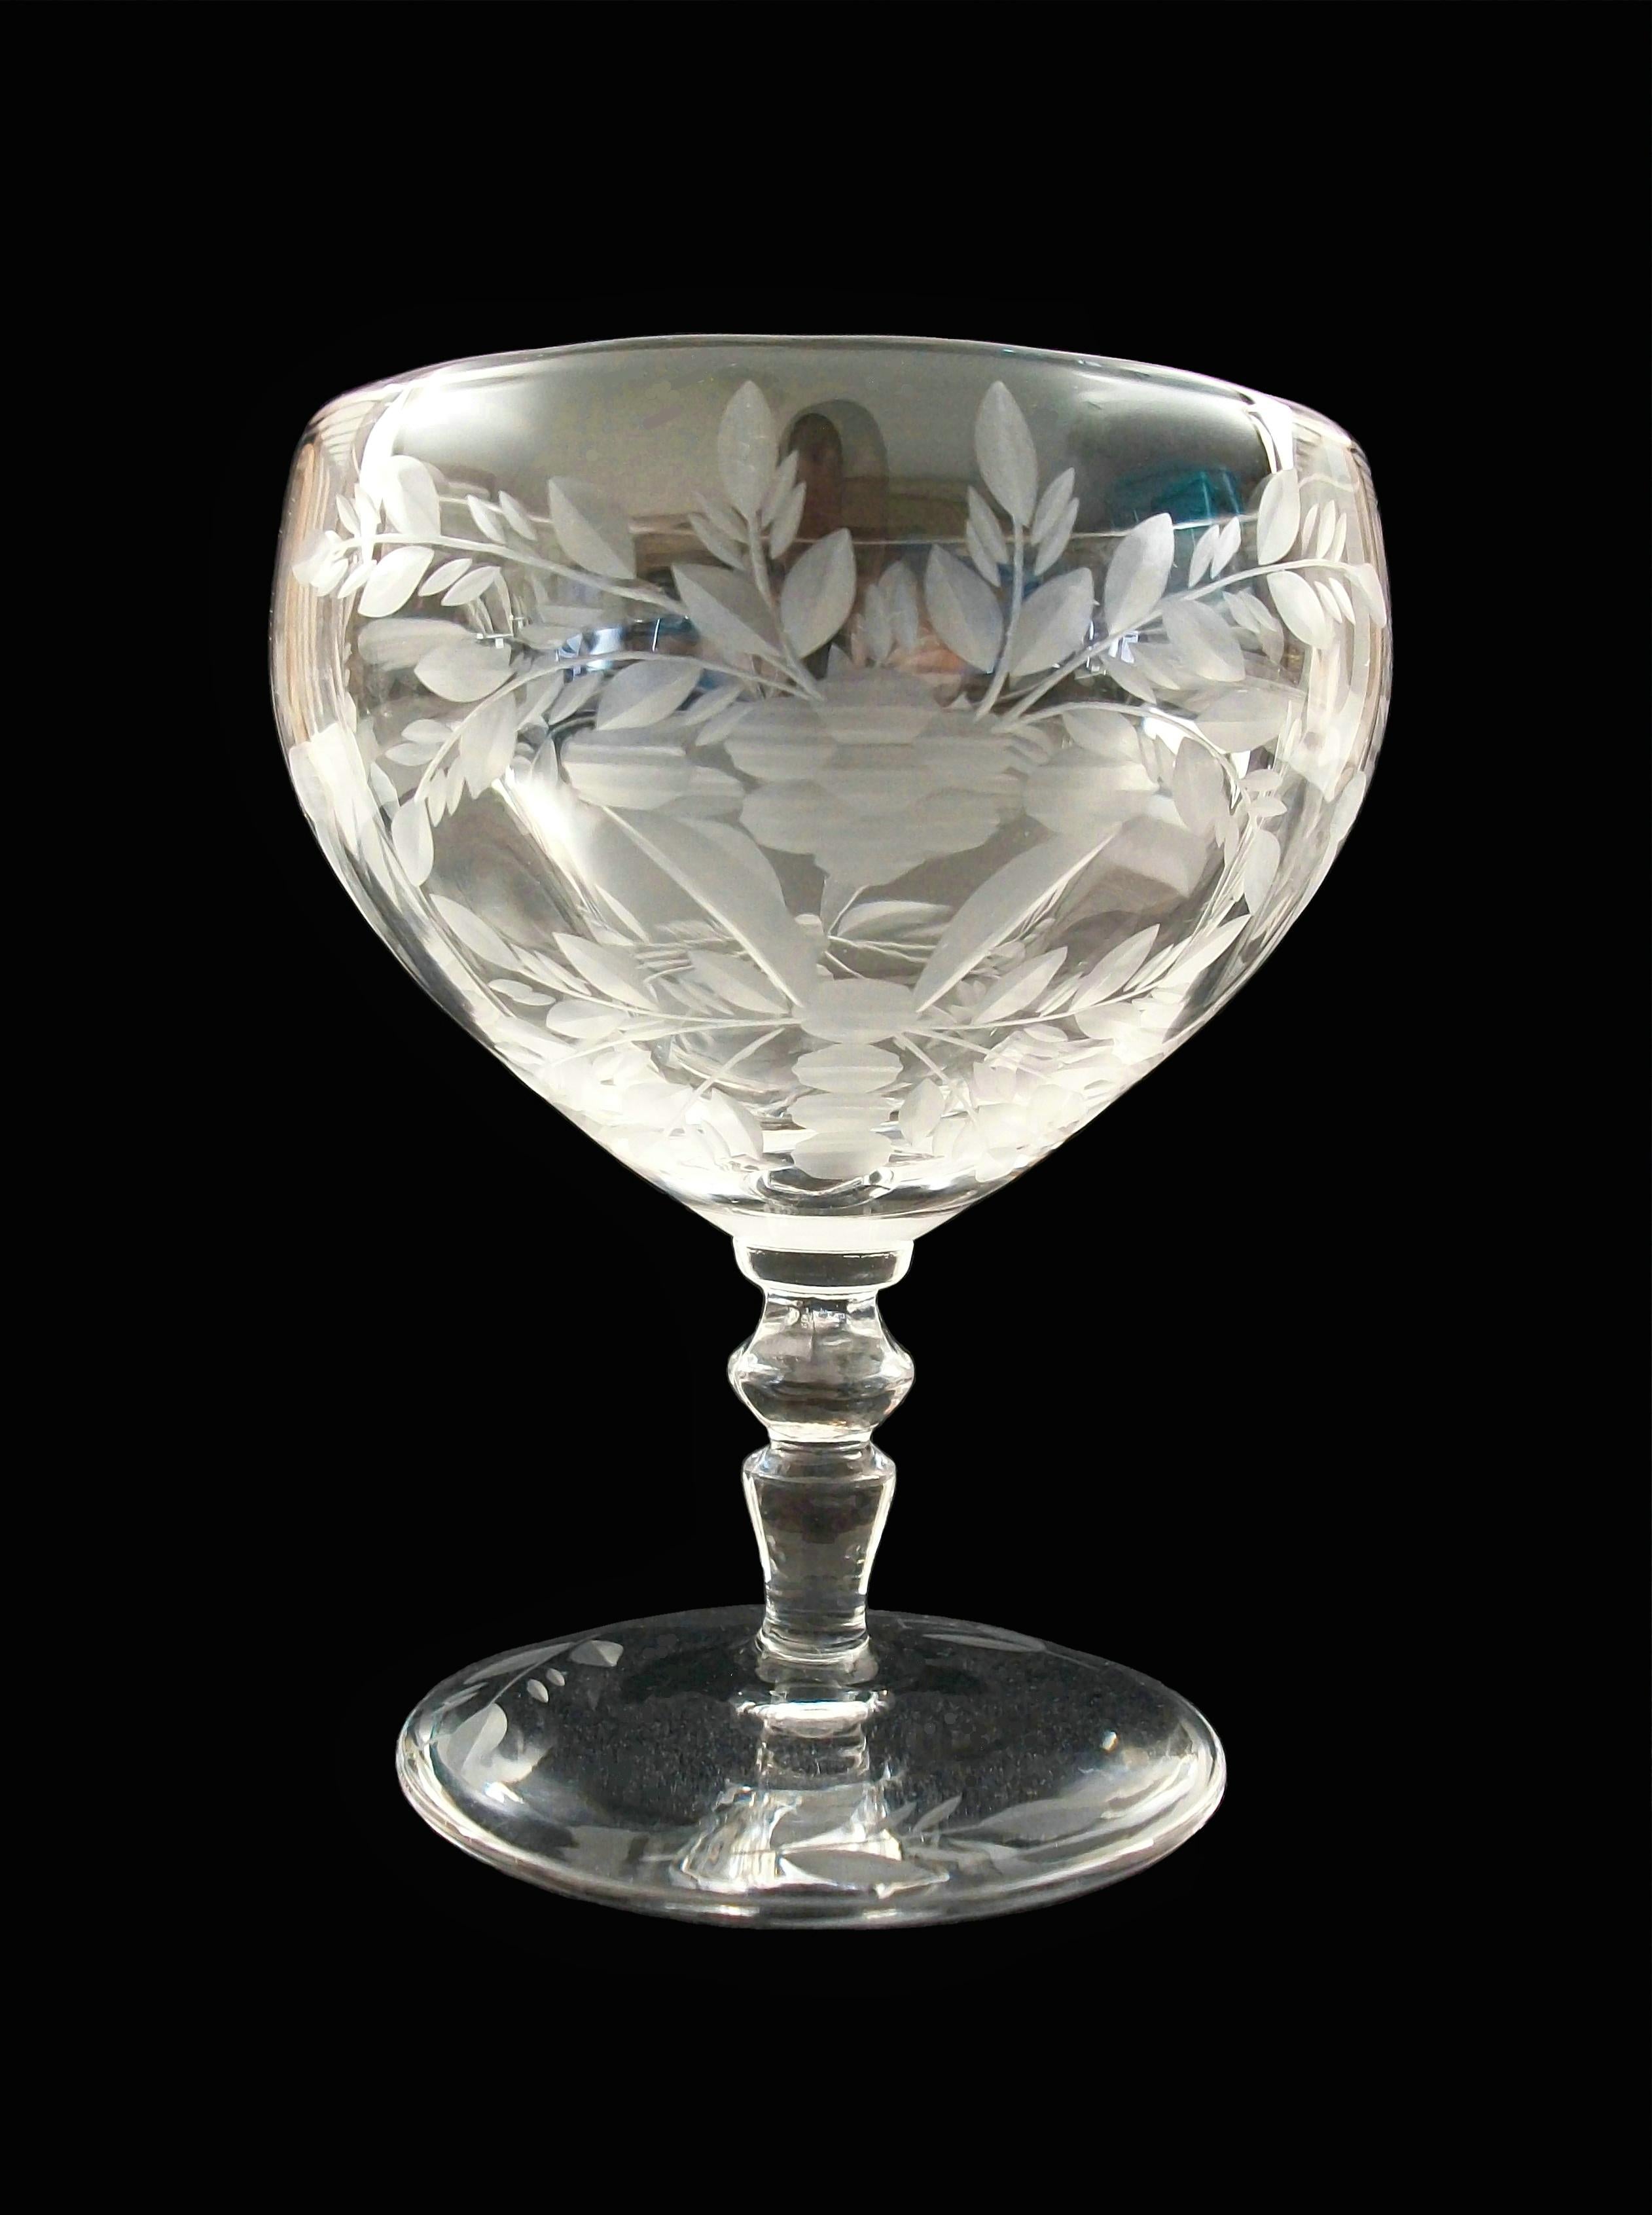 Vintage set of exceptional crystal Champagne coupes - eight pieces - wheel cut by hand featuring flowers and garlands of leaves - branches with leaves to the base - clear crystal - polished finish - unsigned - circa 1930's.

Excellent / mint vintage